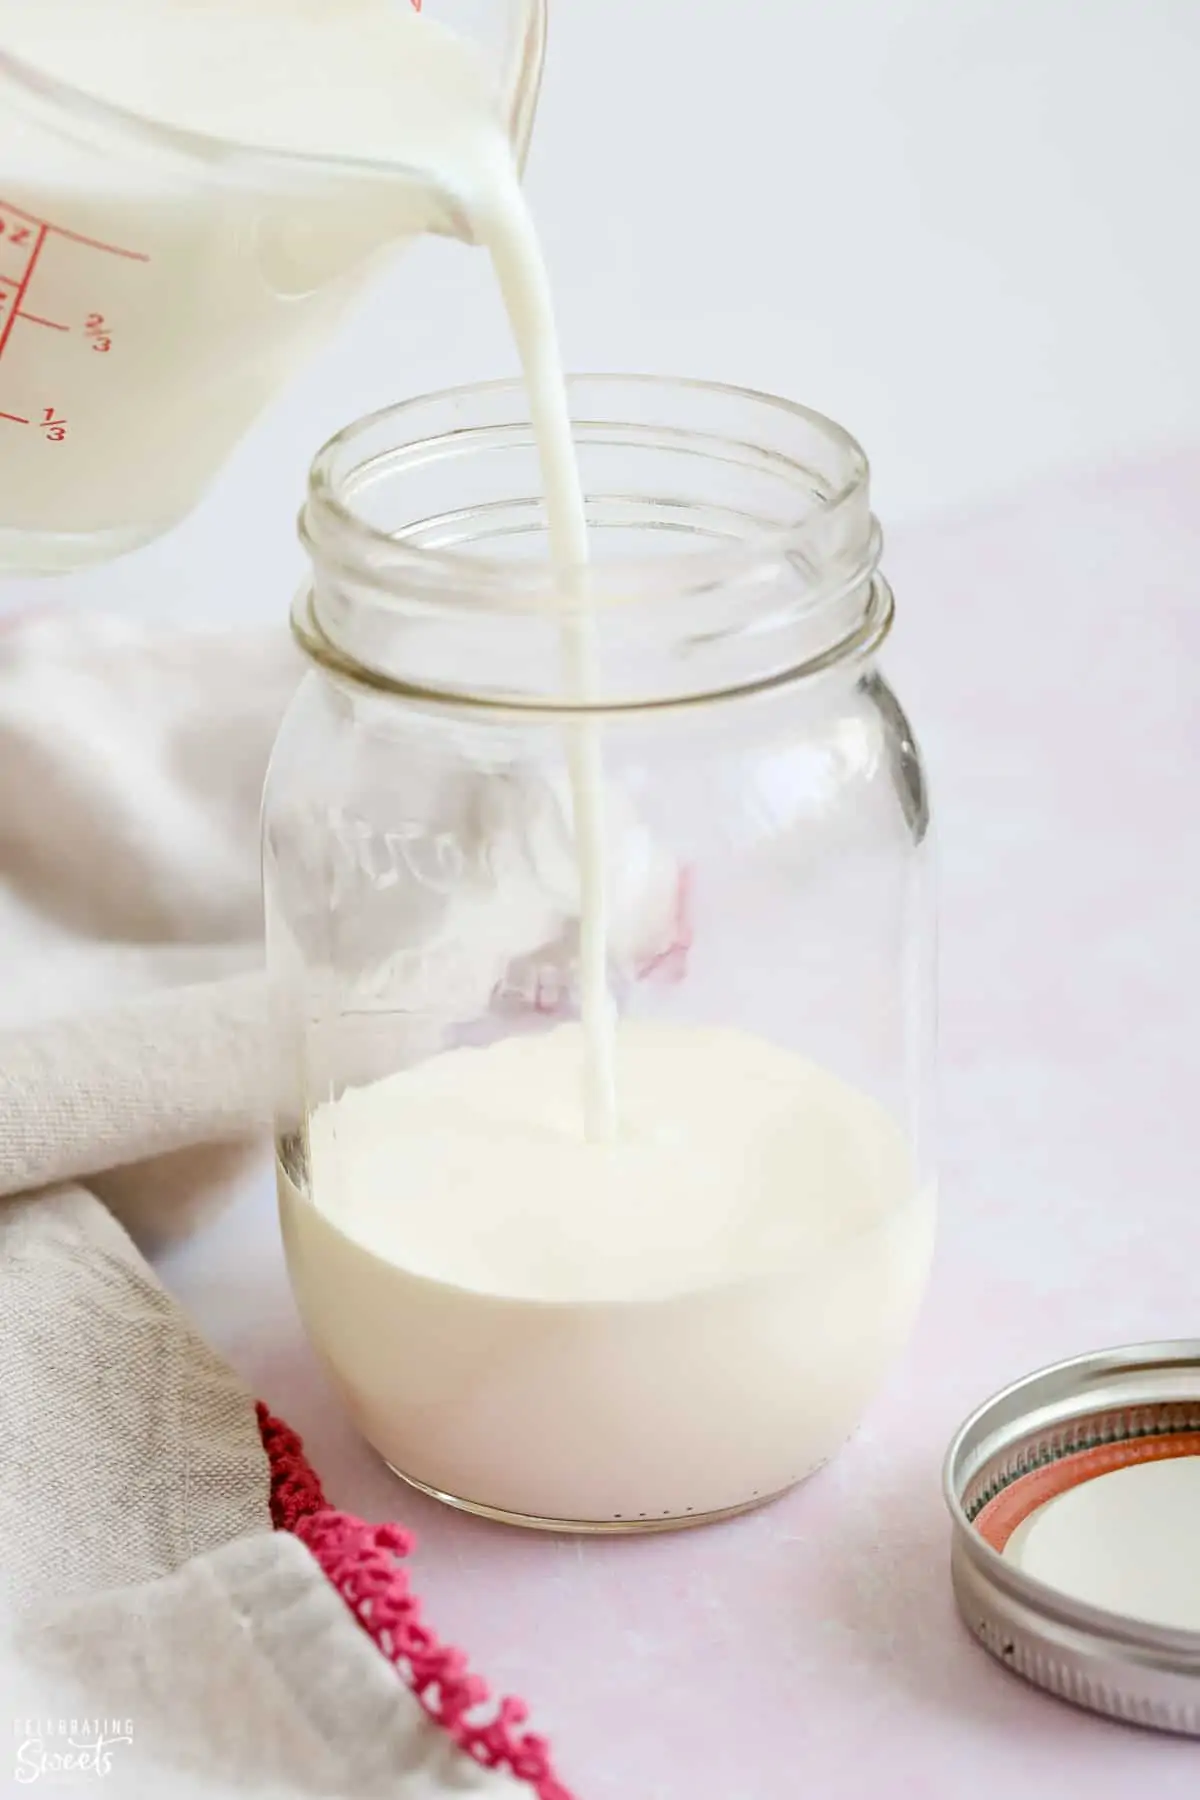 Milk being poured into a jar